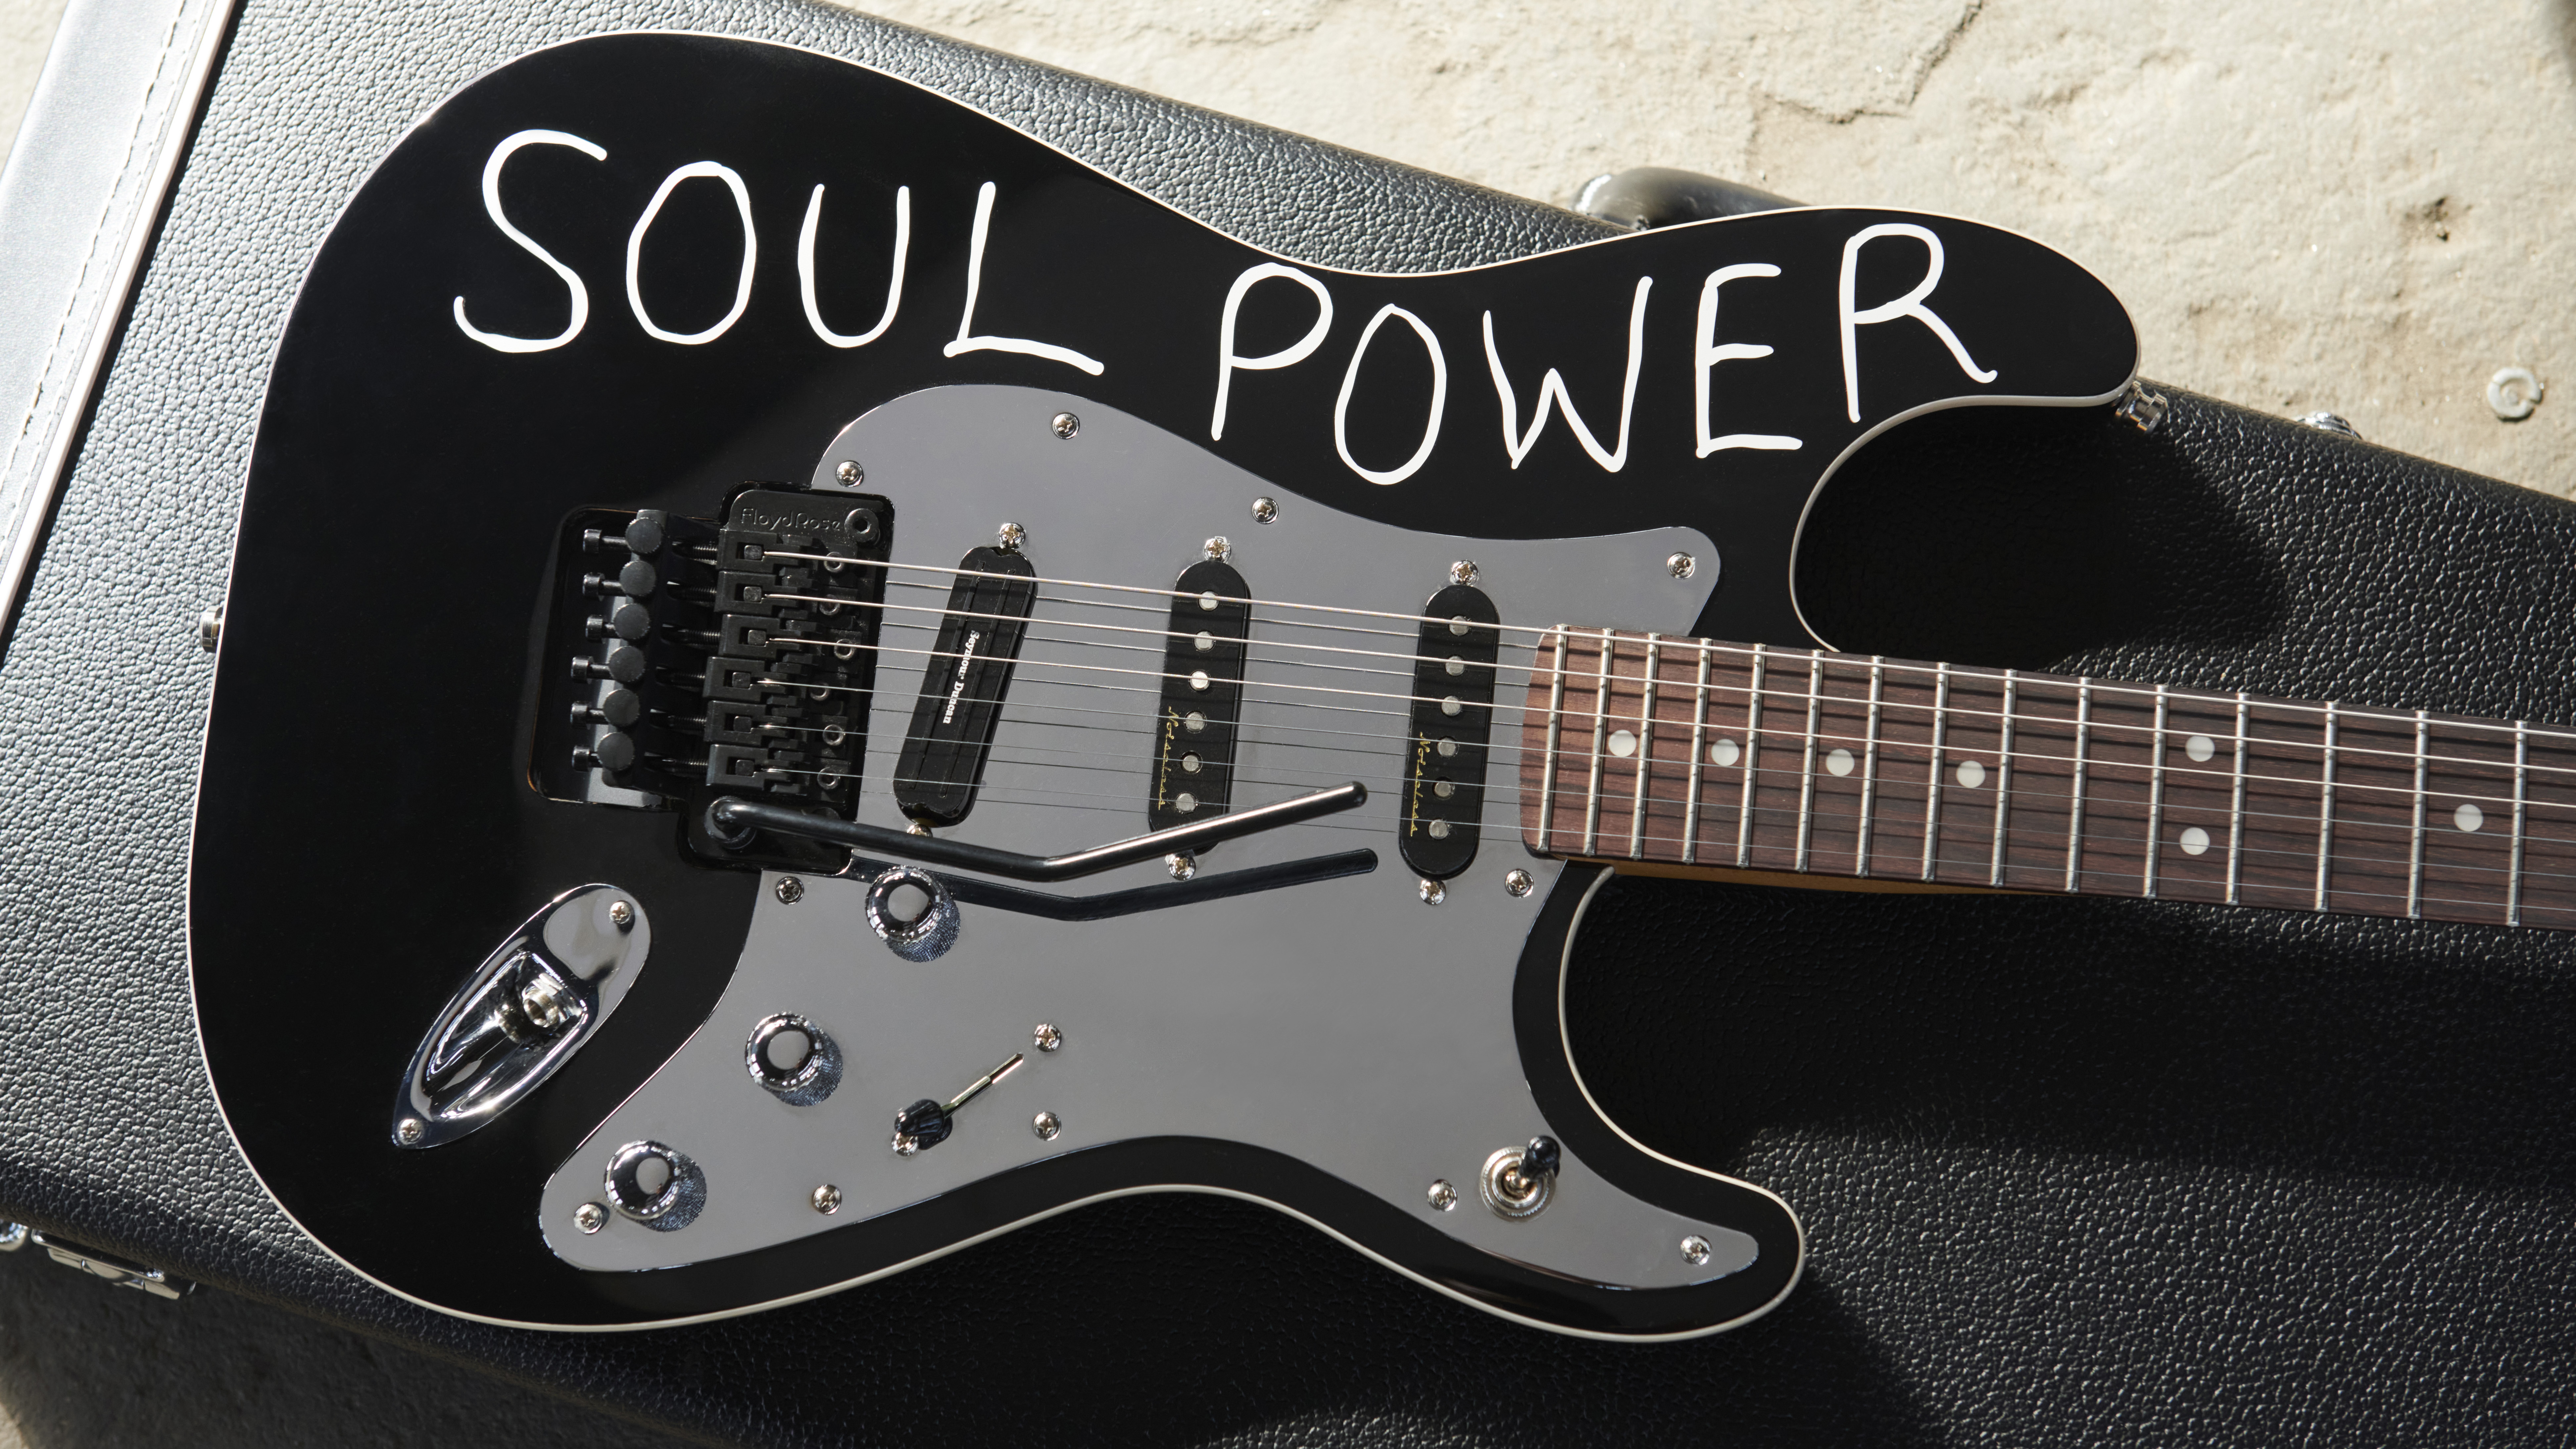 Tom Morello 'Soul Power' Artist Signature Stratocaster released by 